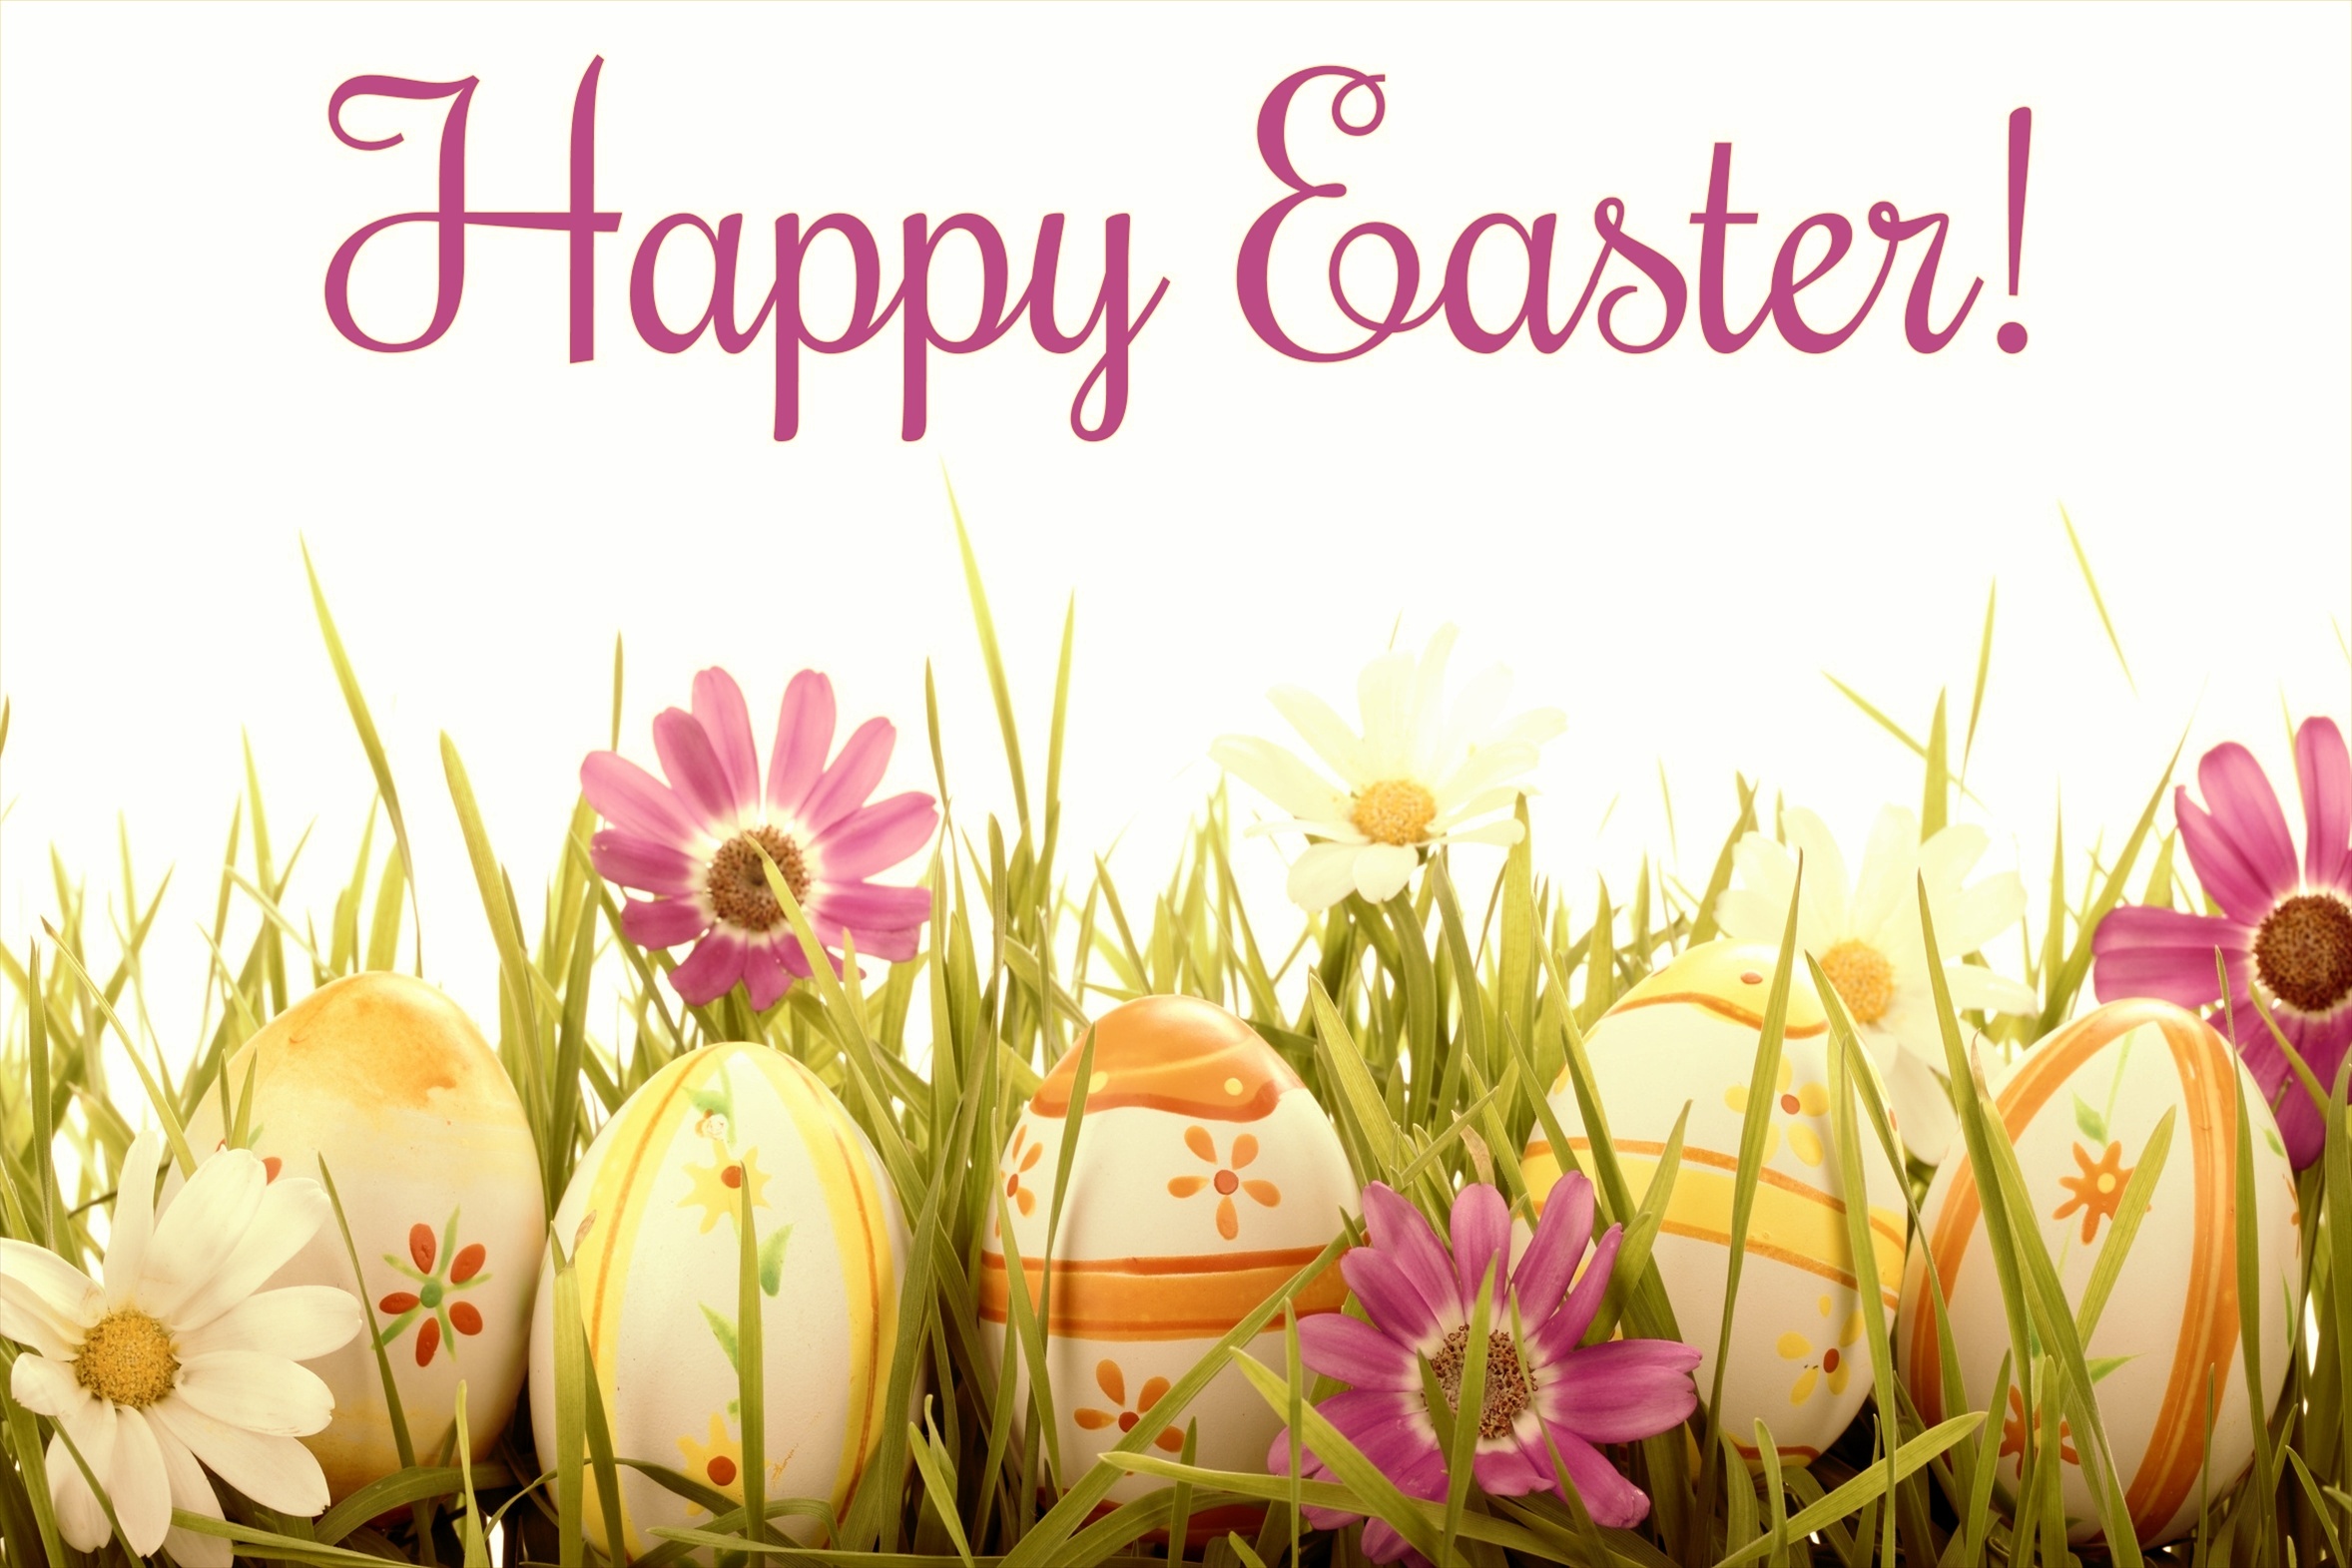 Happy Easter Sunday Wallpaper Images Photos Pictures 2015 2356x1571